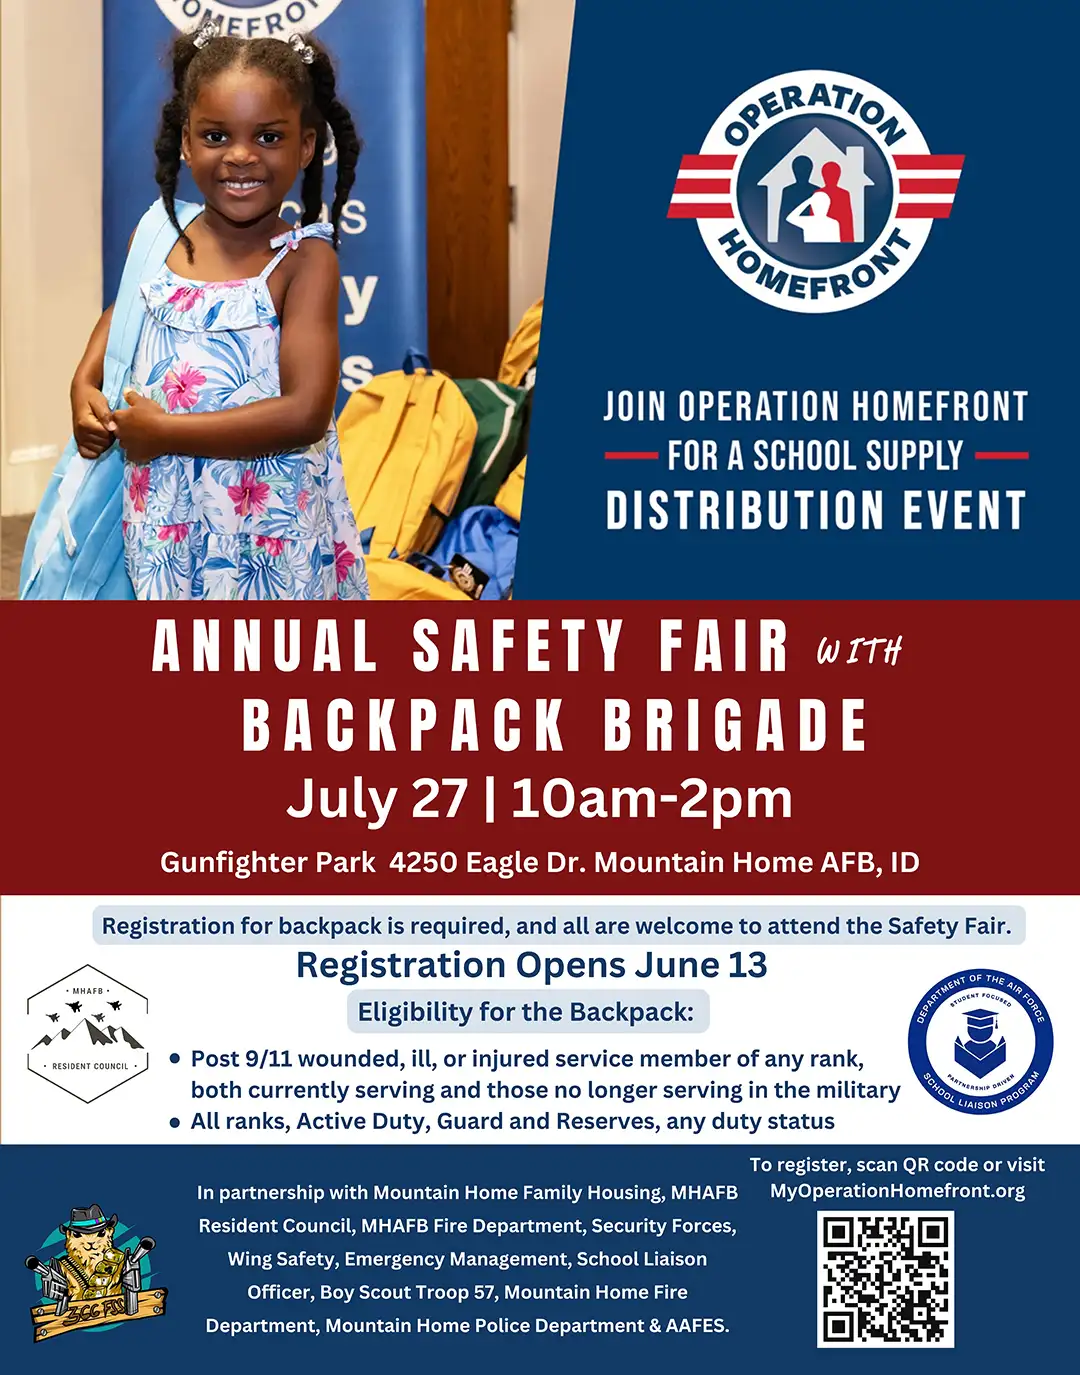 Annual Safety Fair with Backpack Brigade